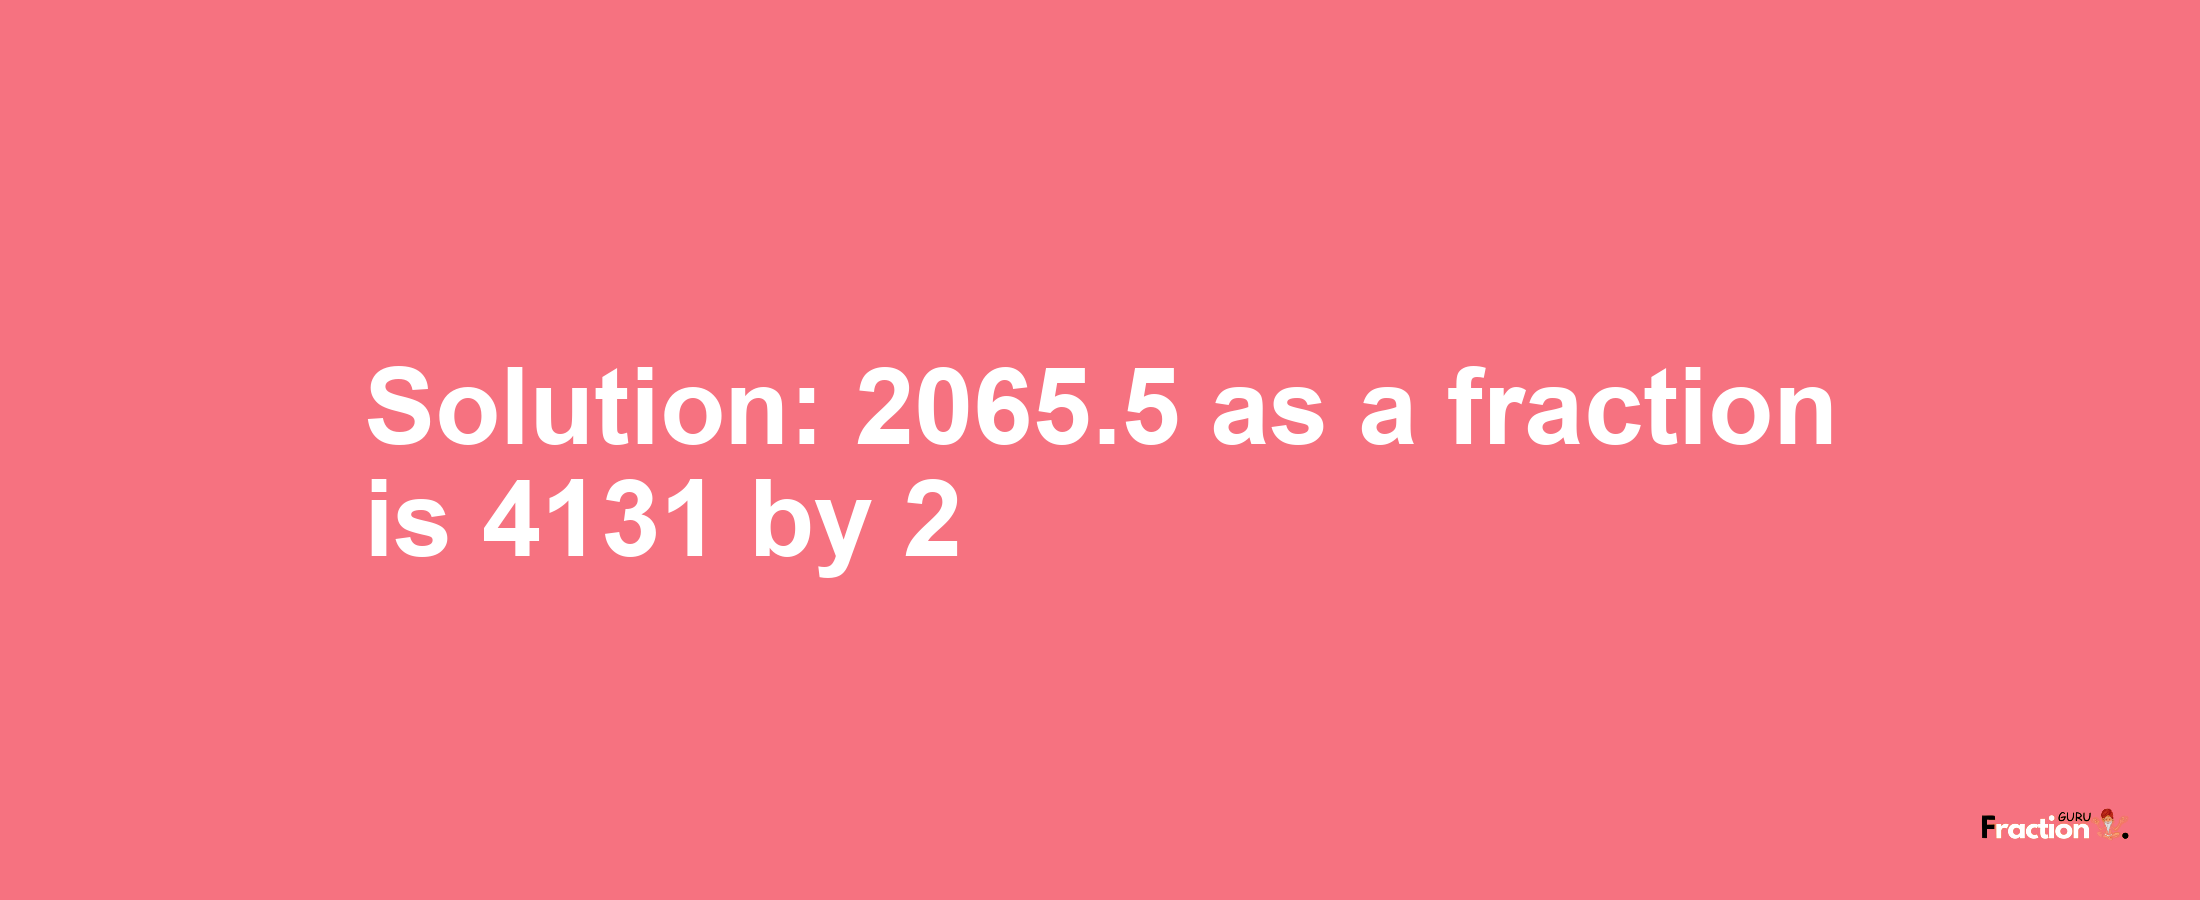 Solution:2065.5 as a fraction is 4131/2